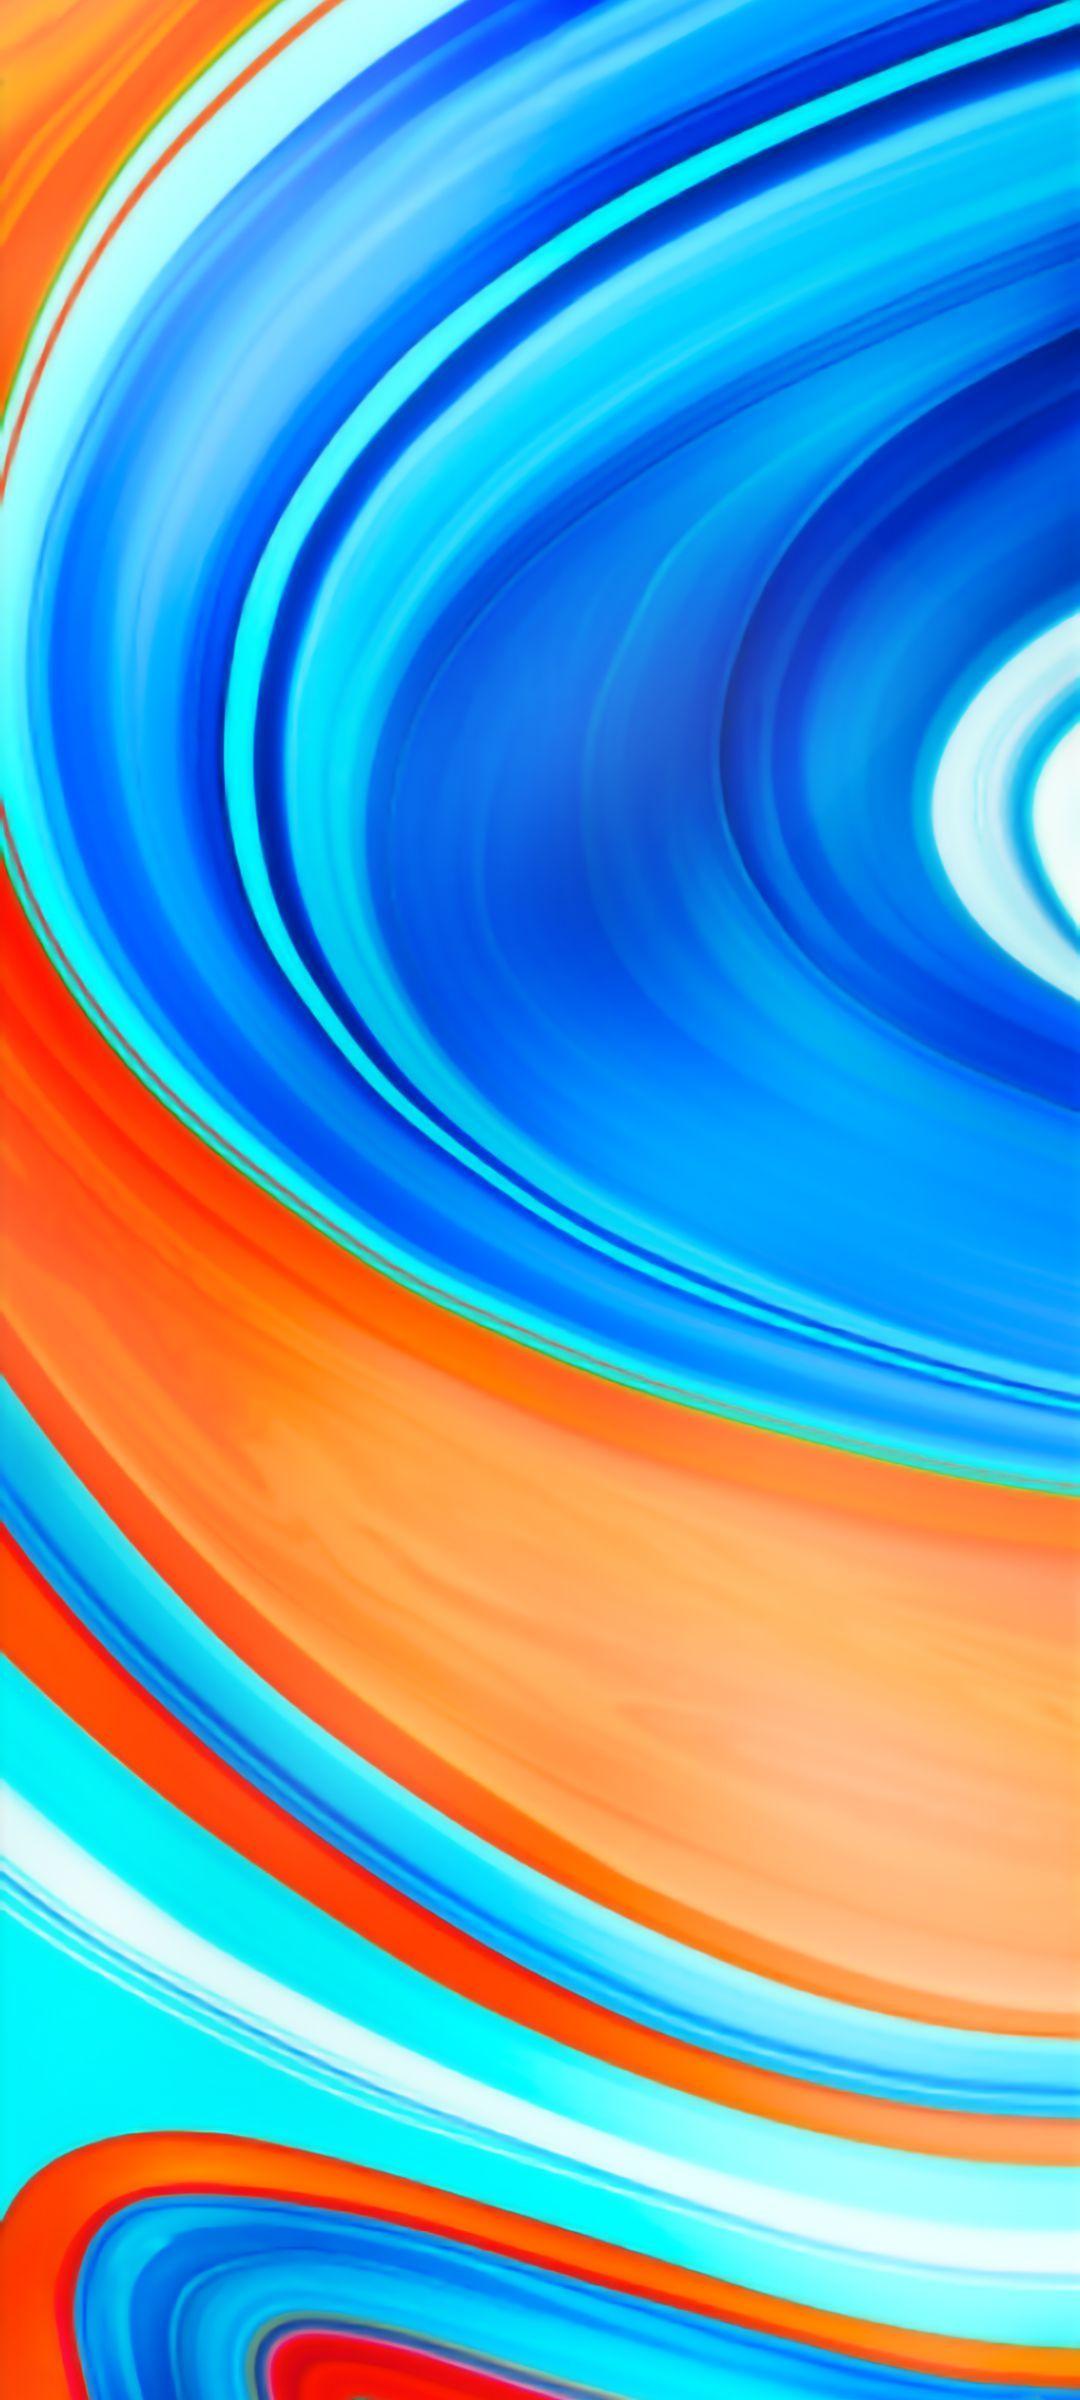 Redmi Note 9 Pro Max Wallpapers - Top Free Redmi Note 9 Pro Max Backgrounds  - WallpaperAccess